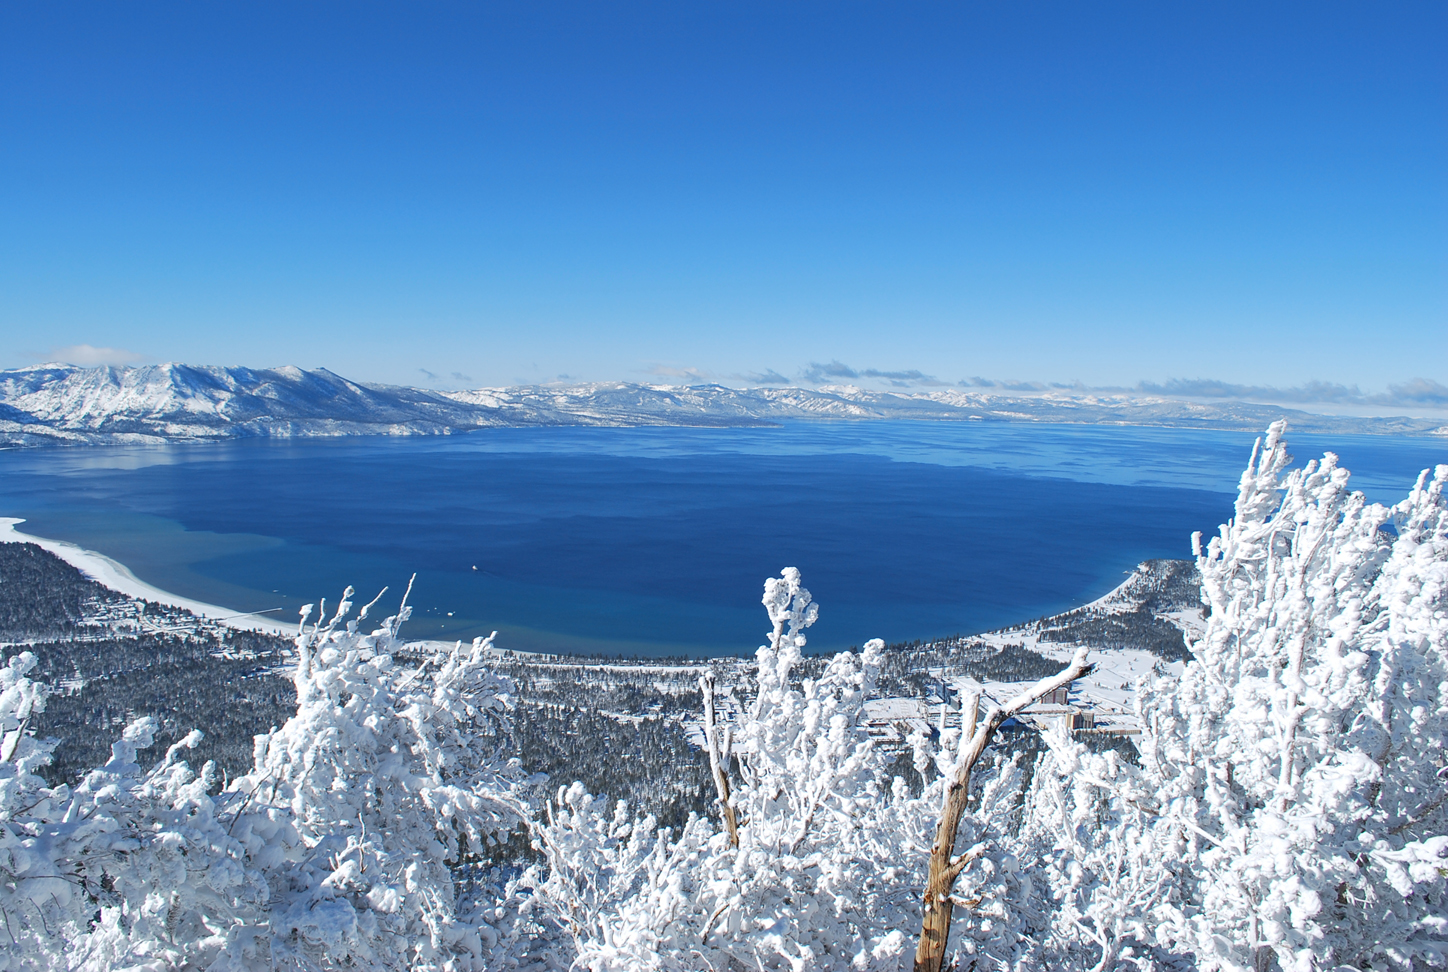 Lake Tahoe offers holiday merry-makers a winter wonderland of skiing and celebrating at The Landing Resort & Spa.